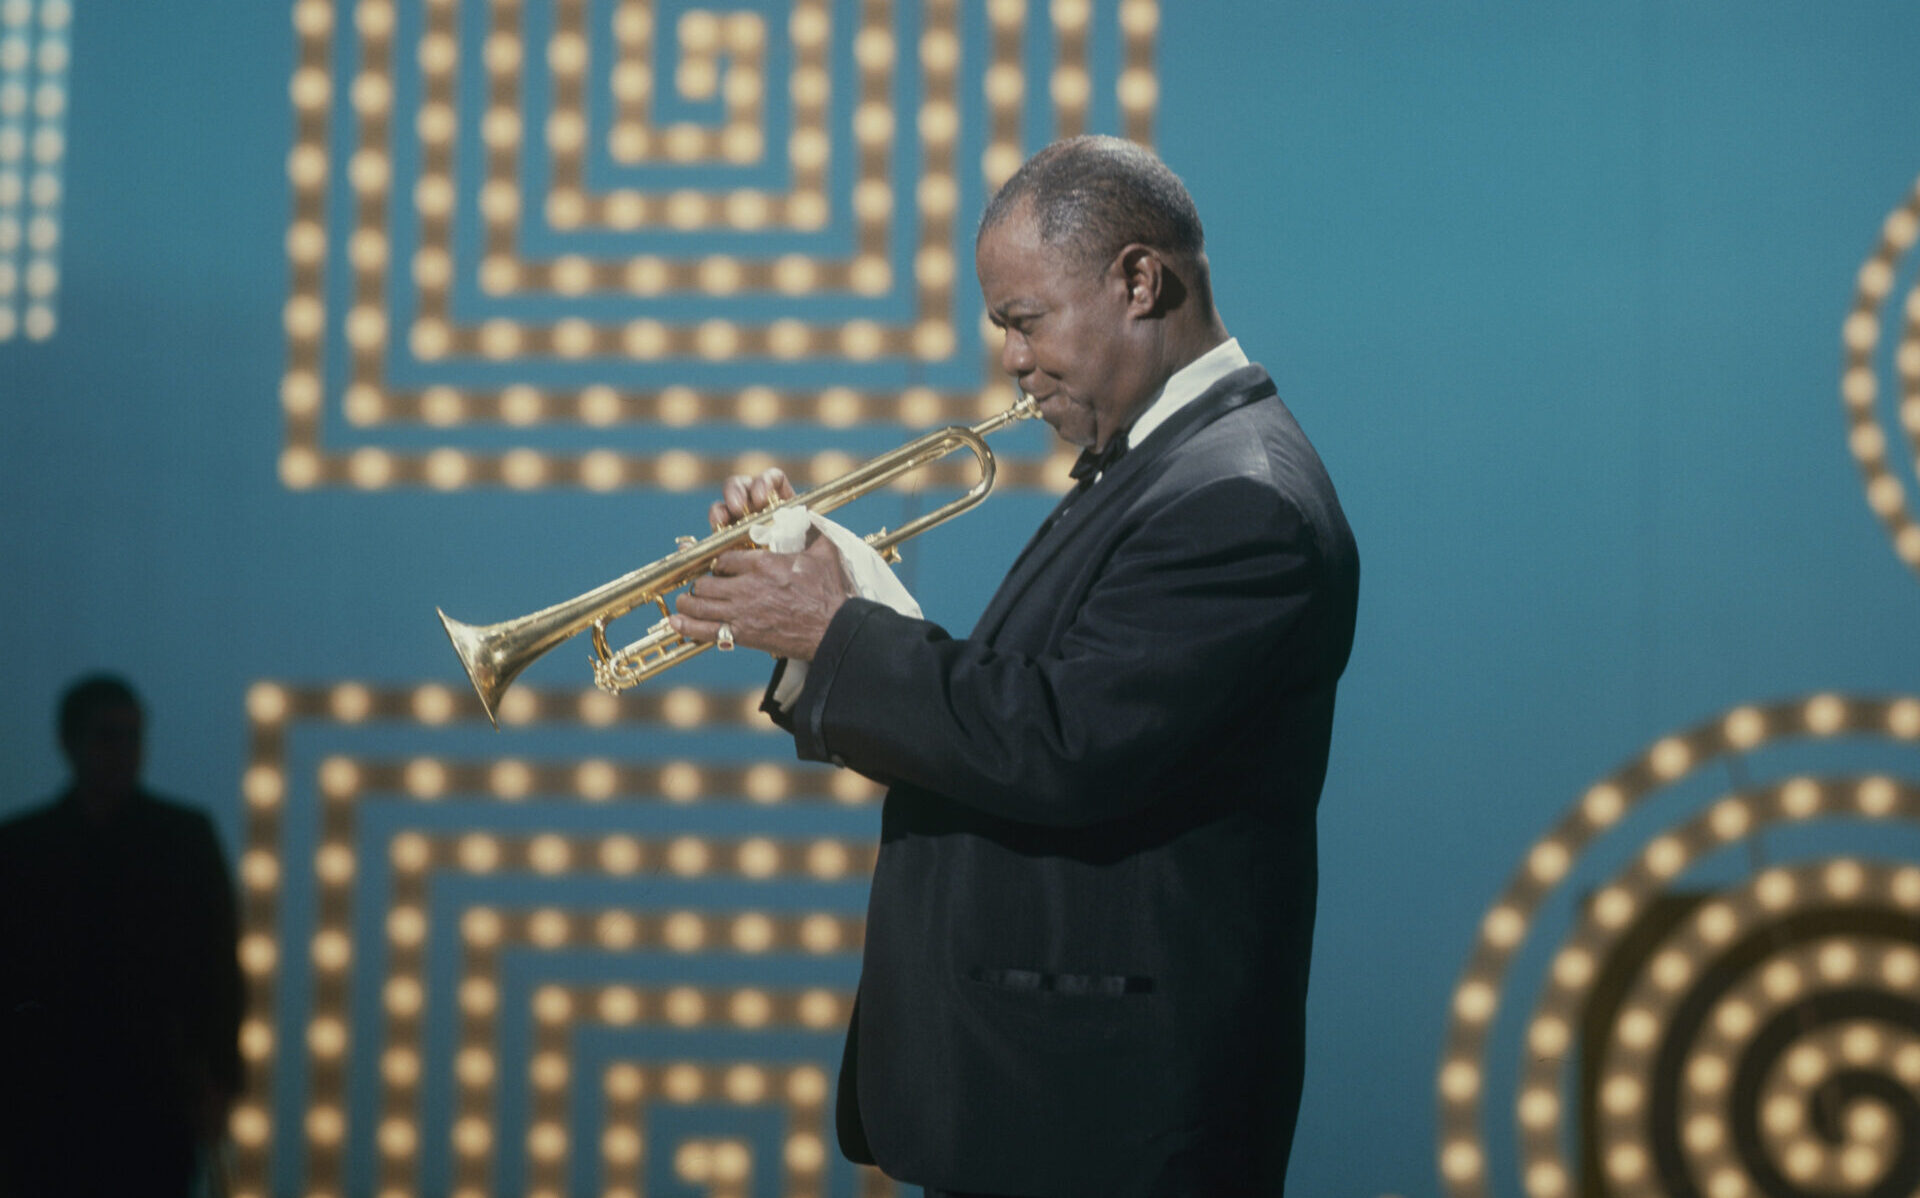 NEW YORK, UNITED STATES - JUNE 01: Trumpeter Louis Armstrong performs on the 'Kraft Music Hall' television show filmed at the NBC studios in New York City in June 1967. (Photo by David Redfern/Redferns)